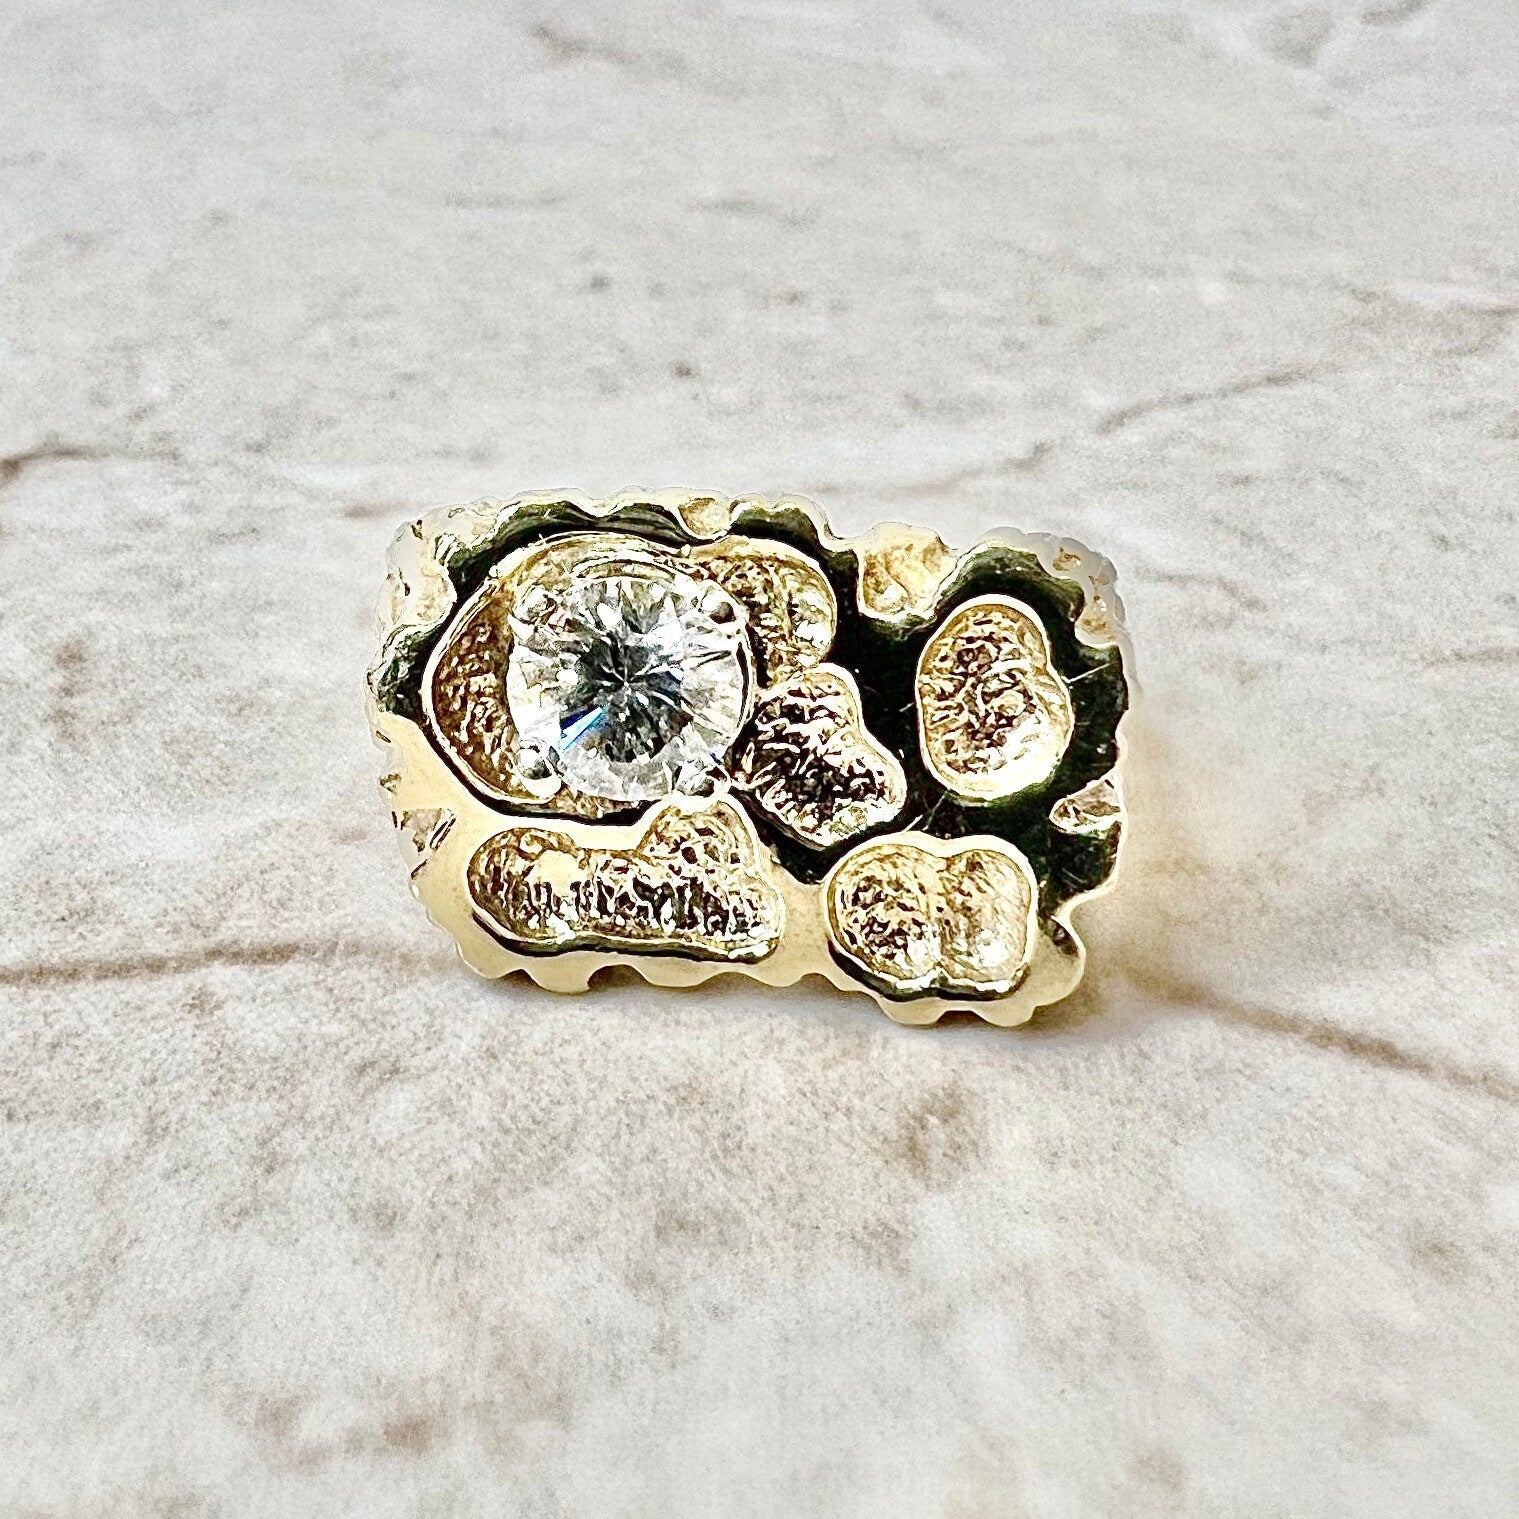 Vintage 14K Diamond Solitaire Ring - Yellow Gold Cocktail Ring - Anniversary Ring - Birthday Gift - Best Gift For Her - Men’s Ring